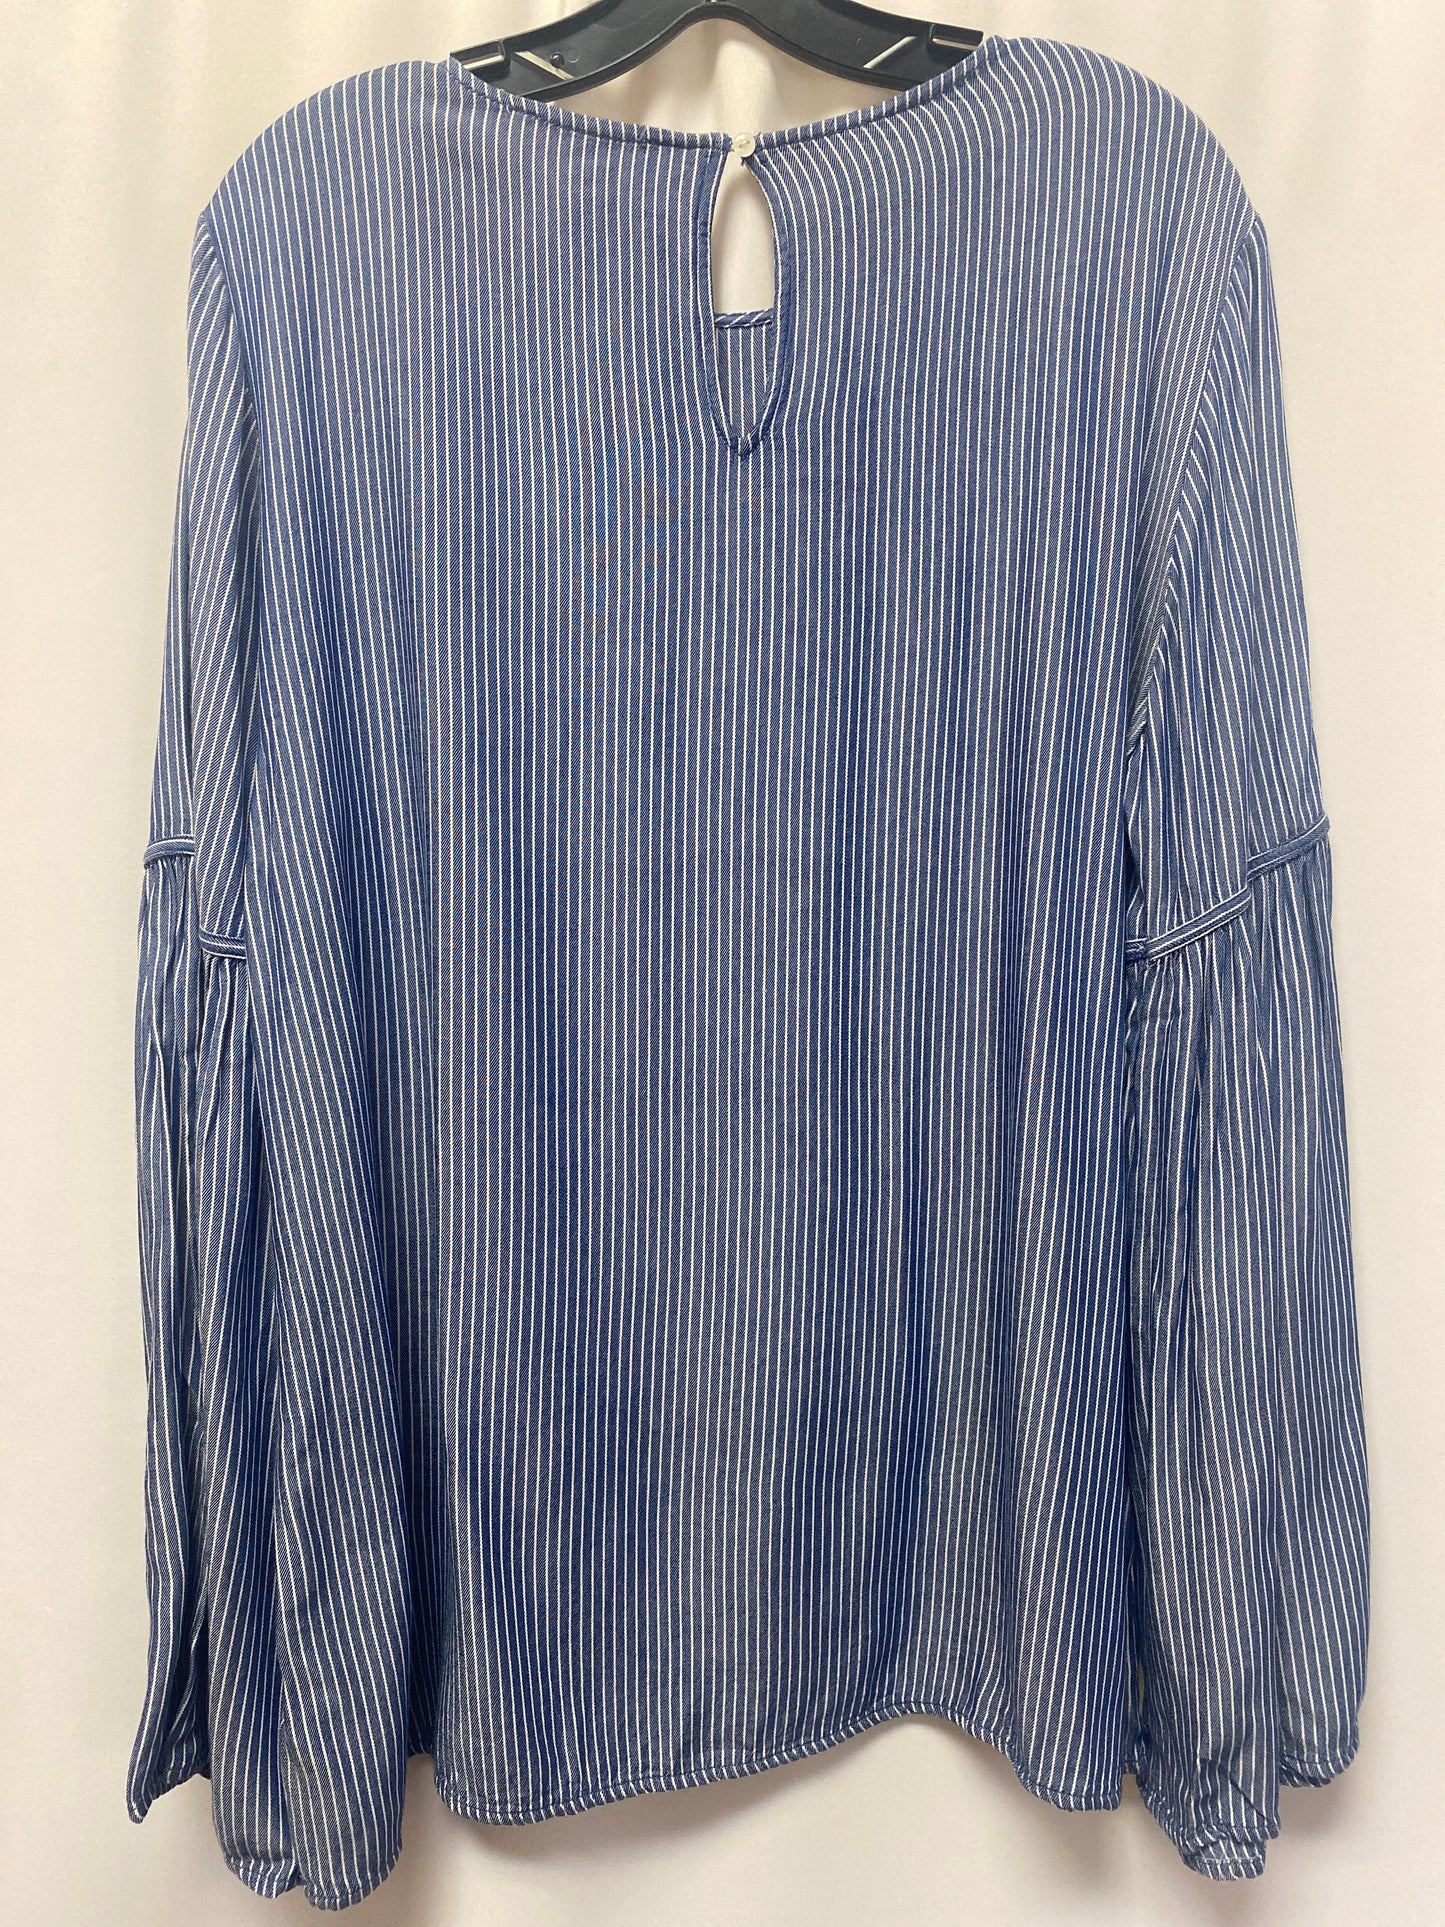 Blue Top Long Sleeve Beachlunchlounge, Size L